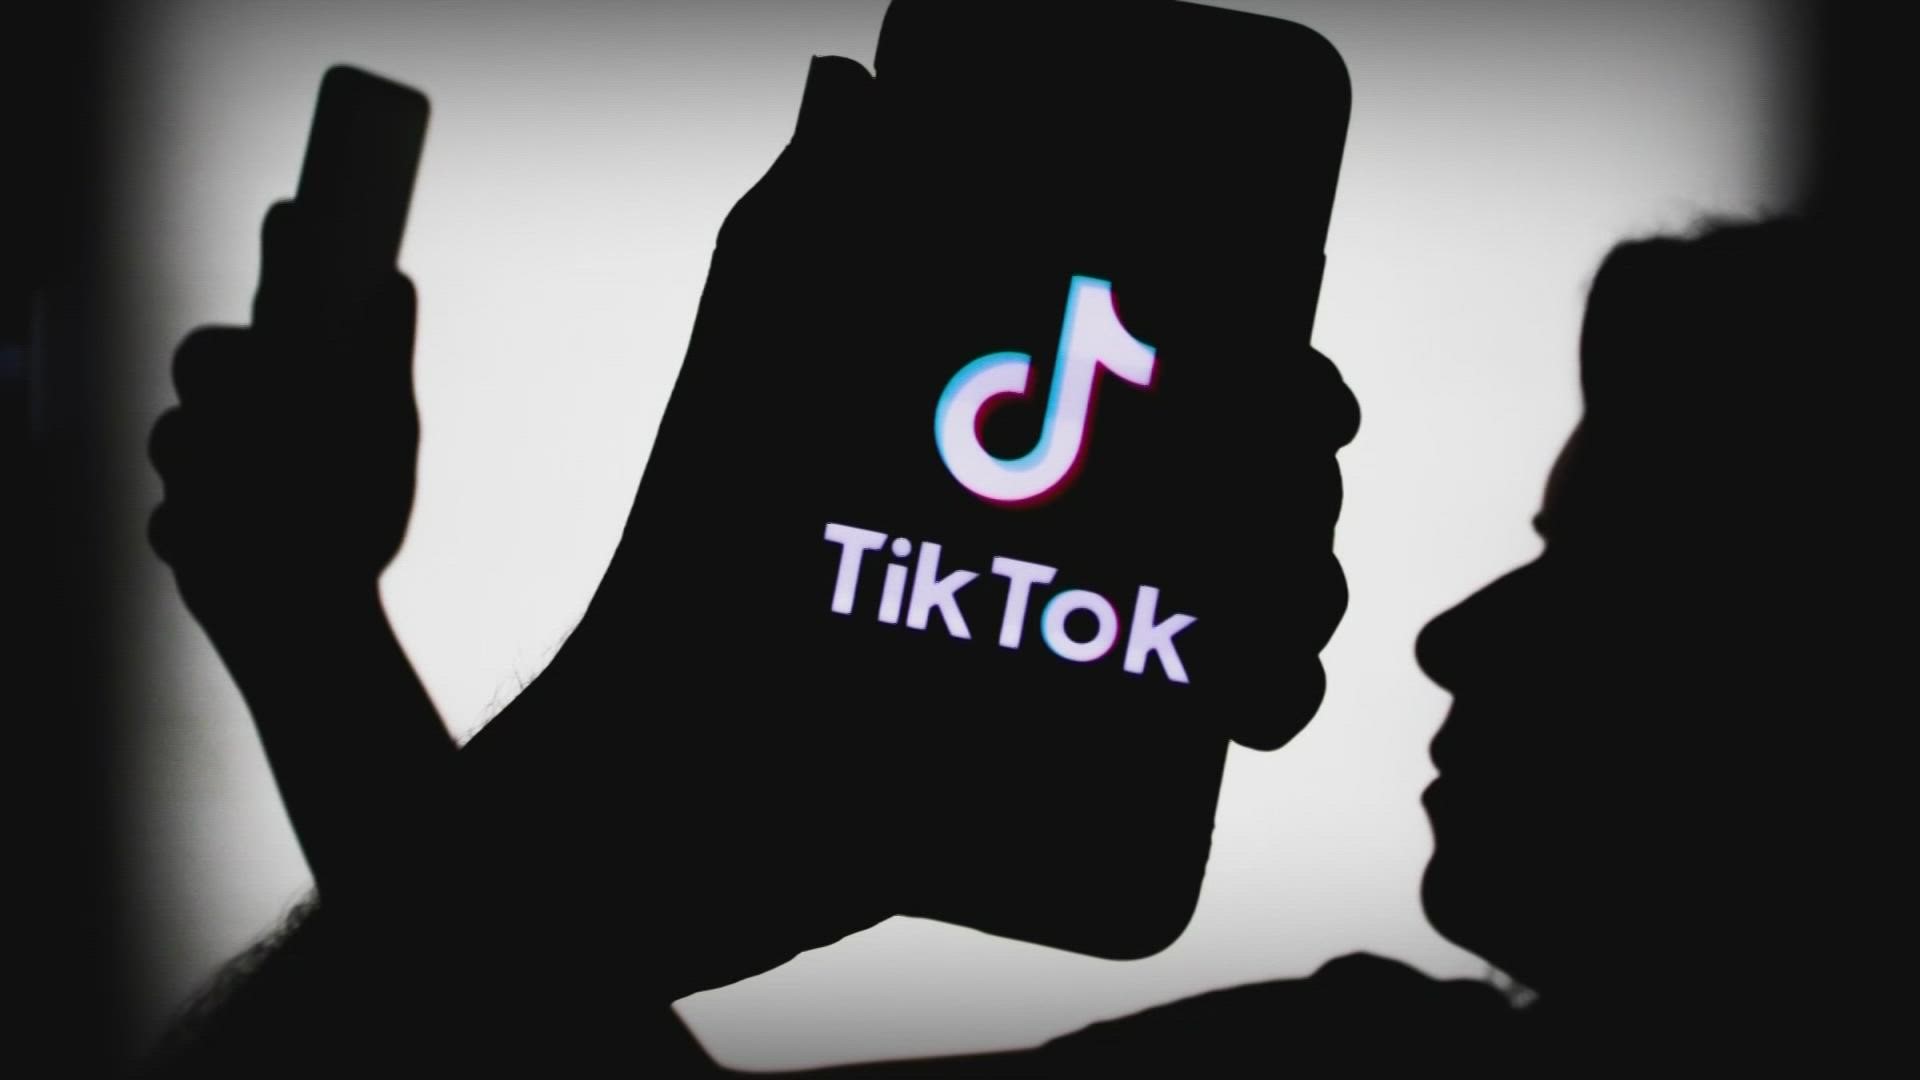 The CEO of TikTok made a rare public appearance to counter the volley of accusations that the hugely popular video-sharing app has been facing.